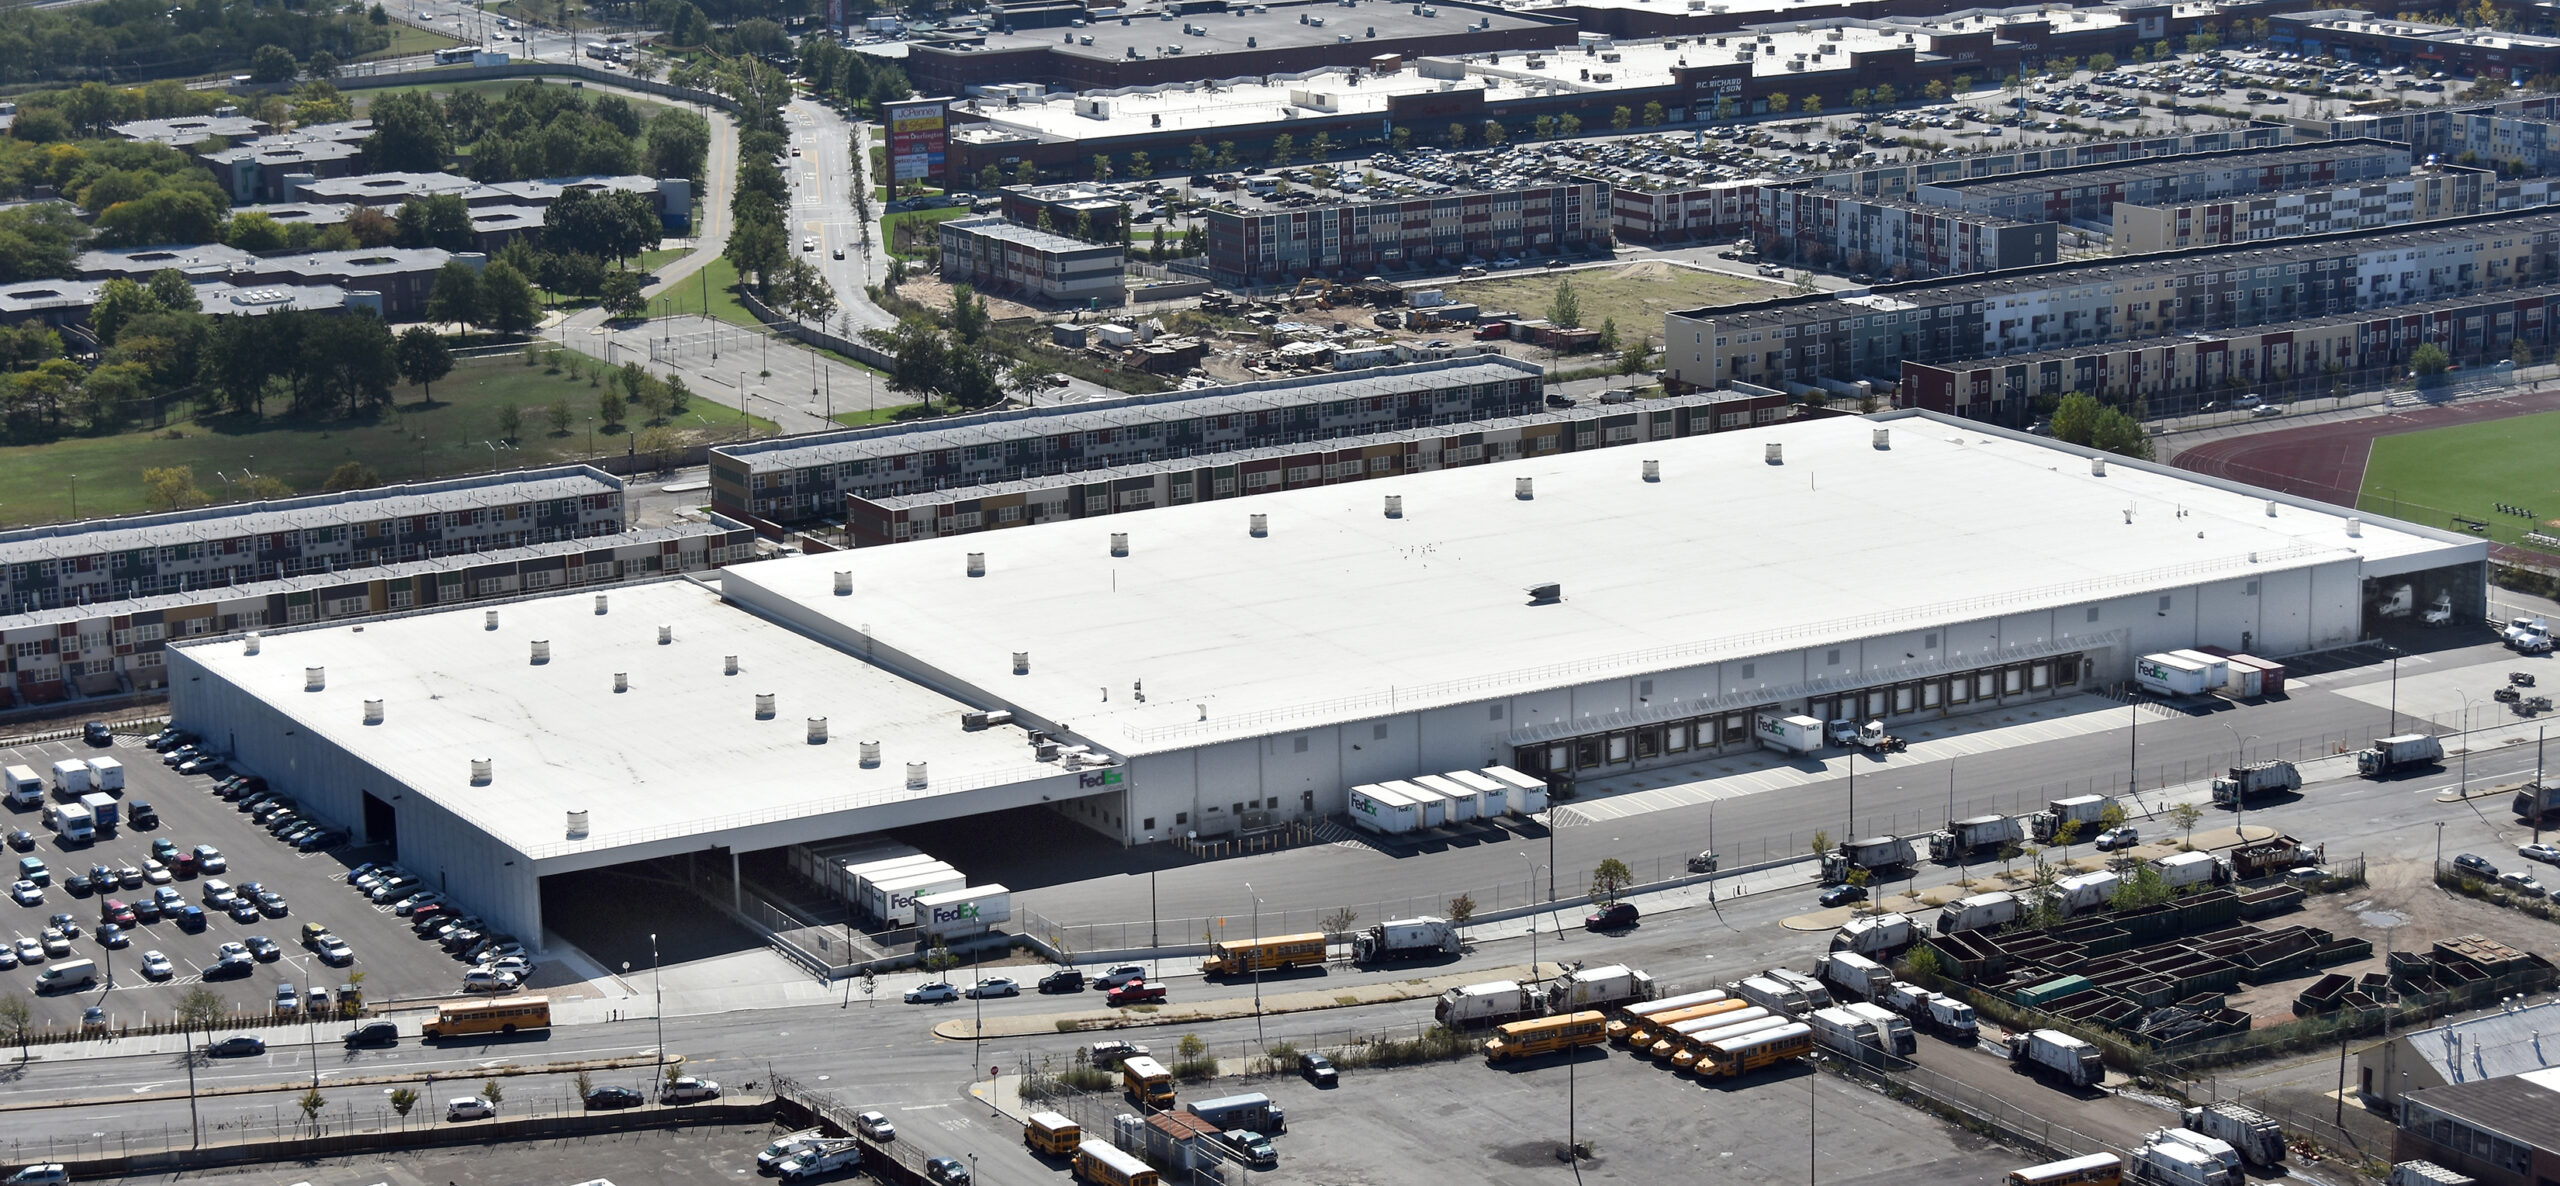 A large distribution center with many alternative uses in the foreground and background